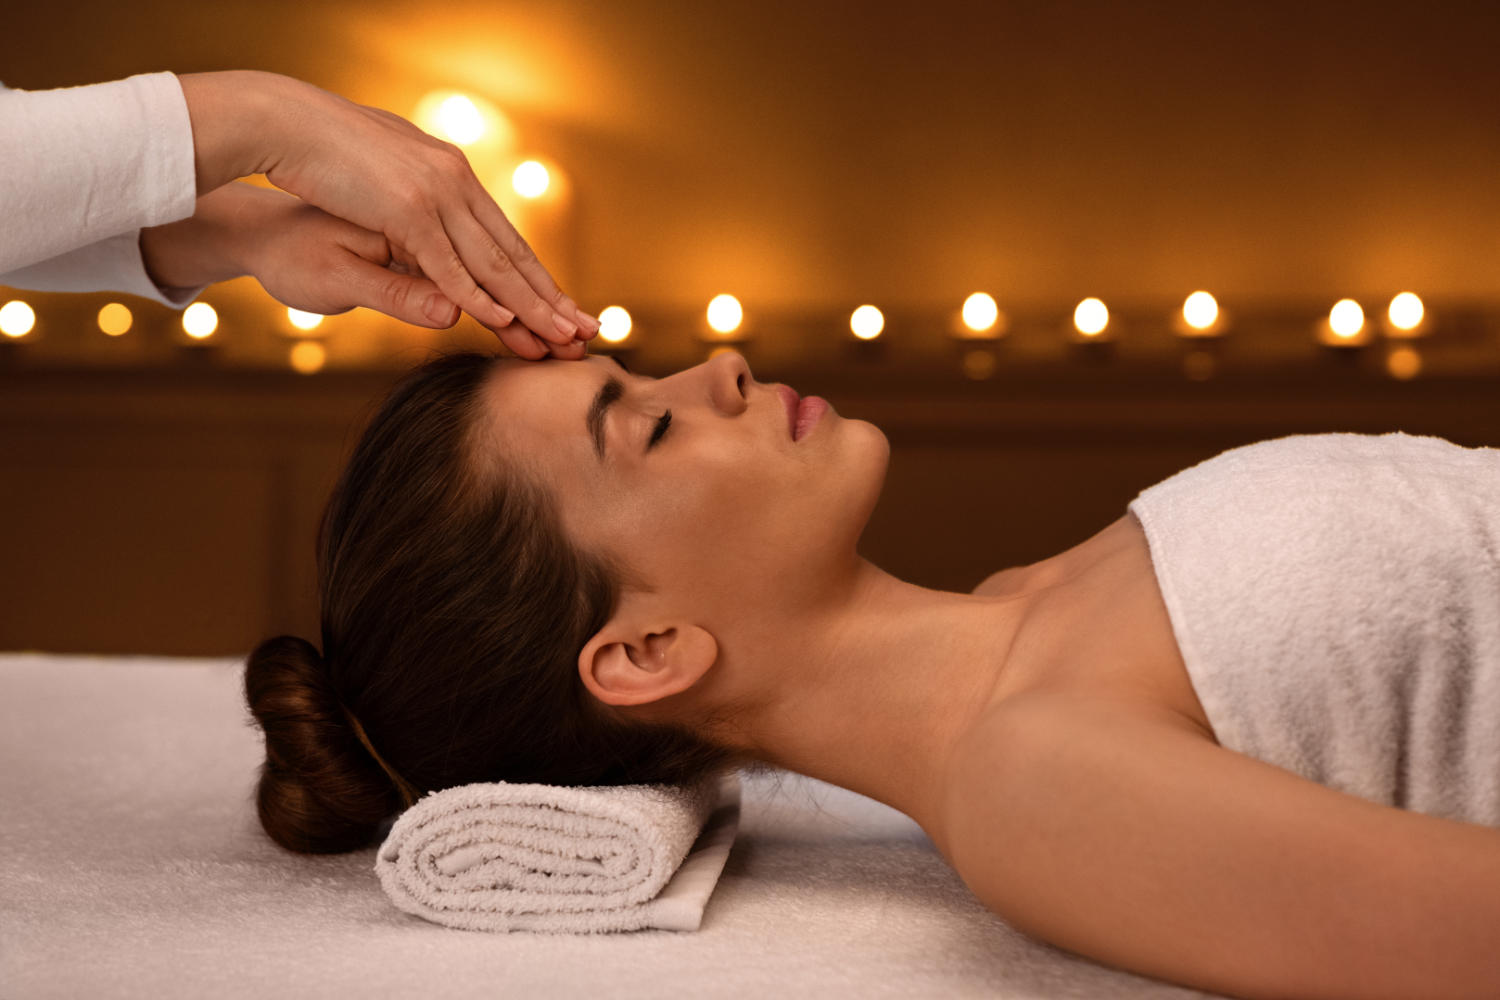 A relaxed woman with closed eyes is getting her forehead massaged with candles in the
				background.